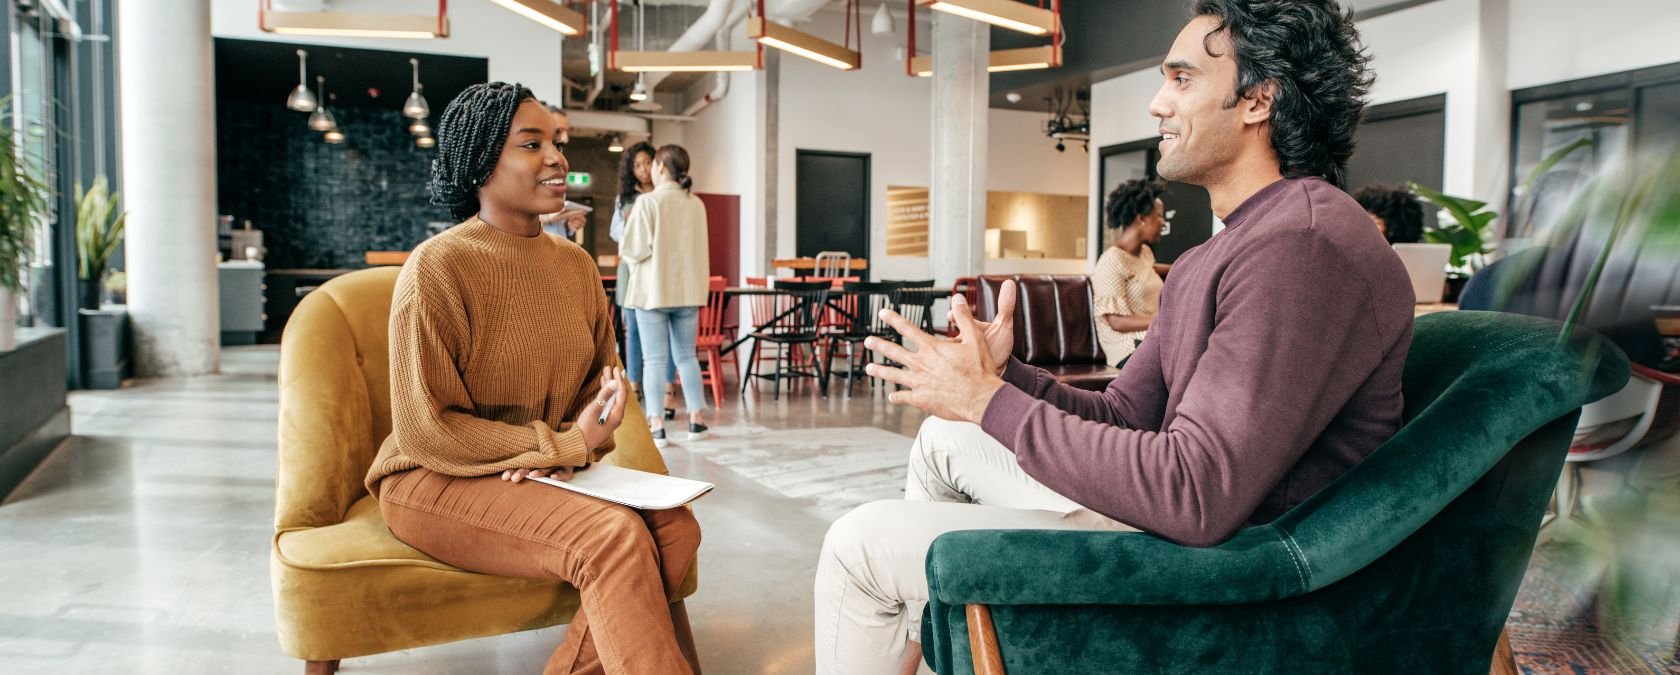 smiling young woman and friendly young man have a conversation in a coworking space